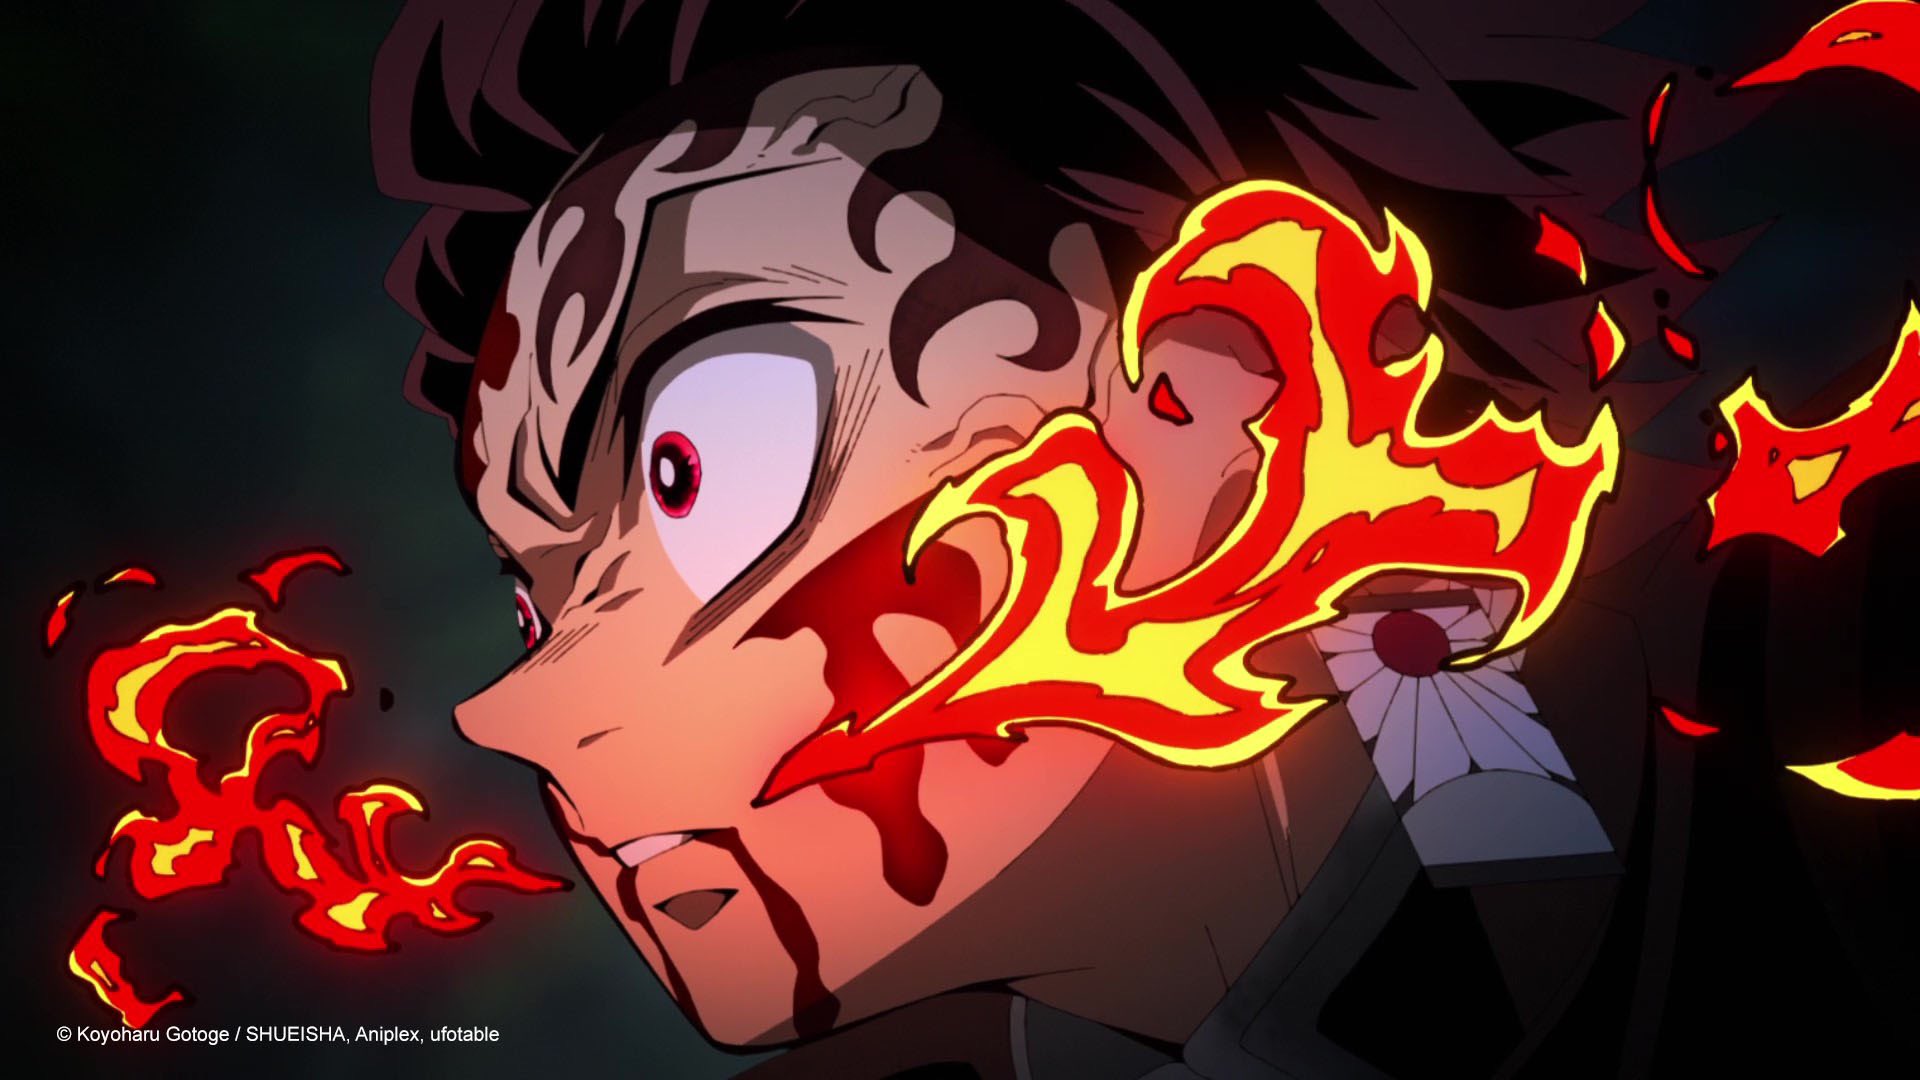 Weeb Central on X: Demon Slayer: Kimetsu no Yaiba Swordsmith Village Arc Ep  2 is Out Now!! The anime is now streaming in INDIA on Crunchyroll &  Netflix!! Also available in both